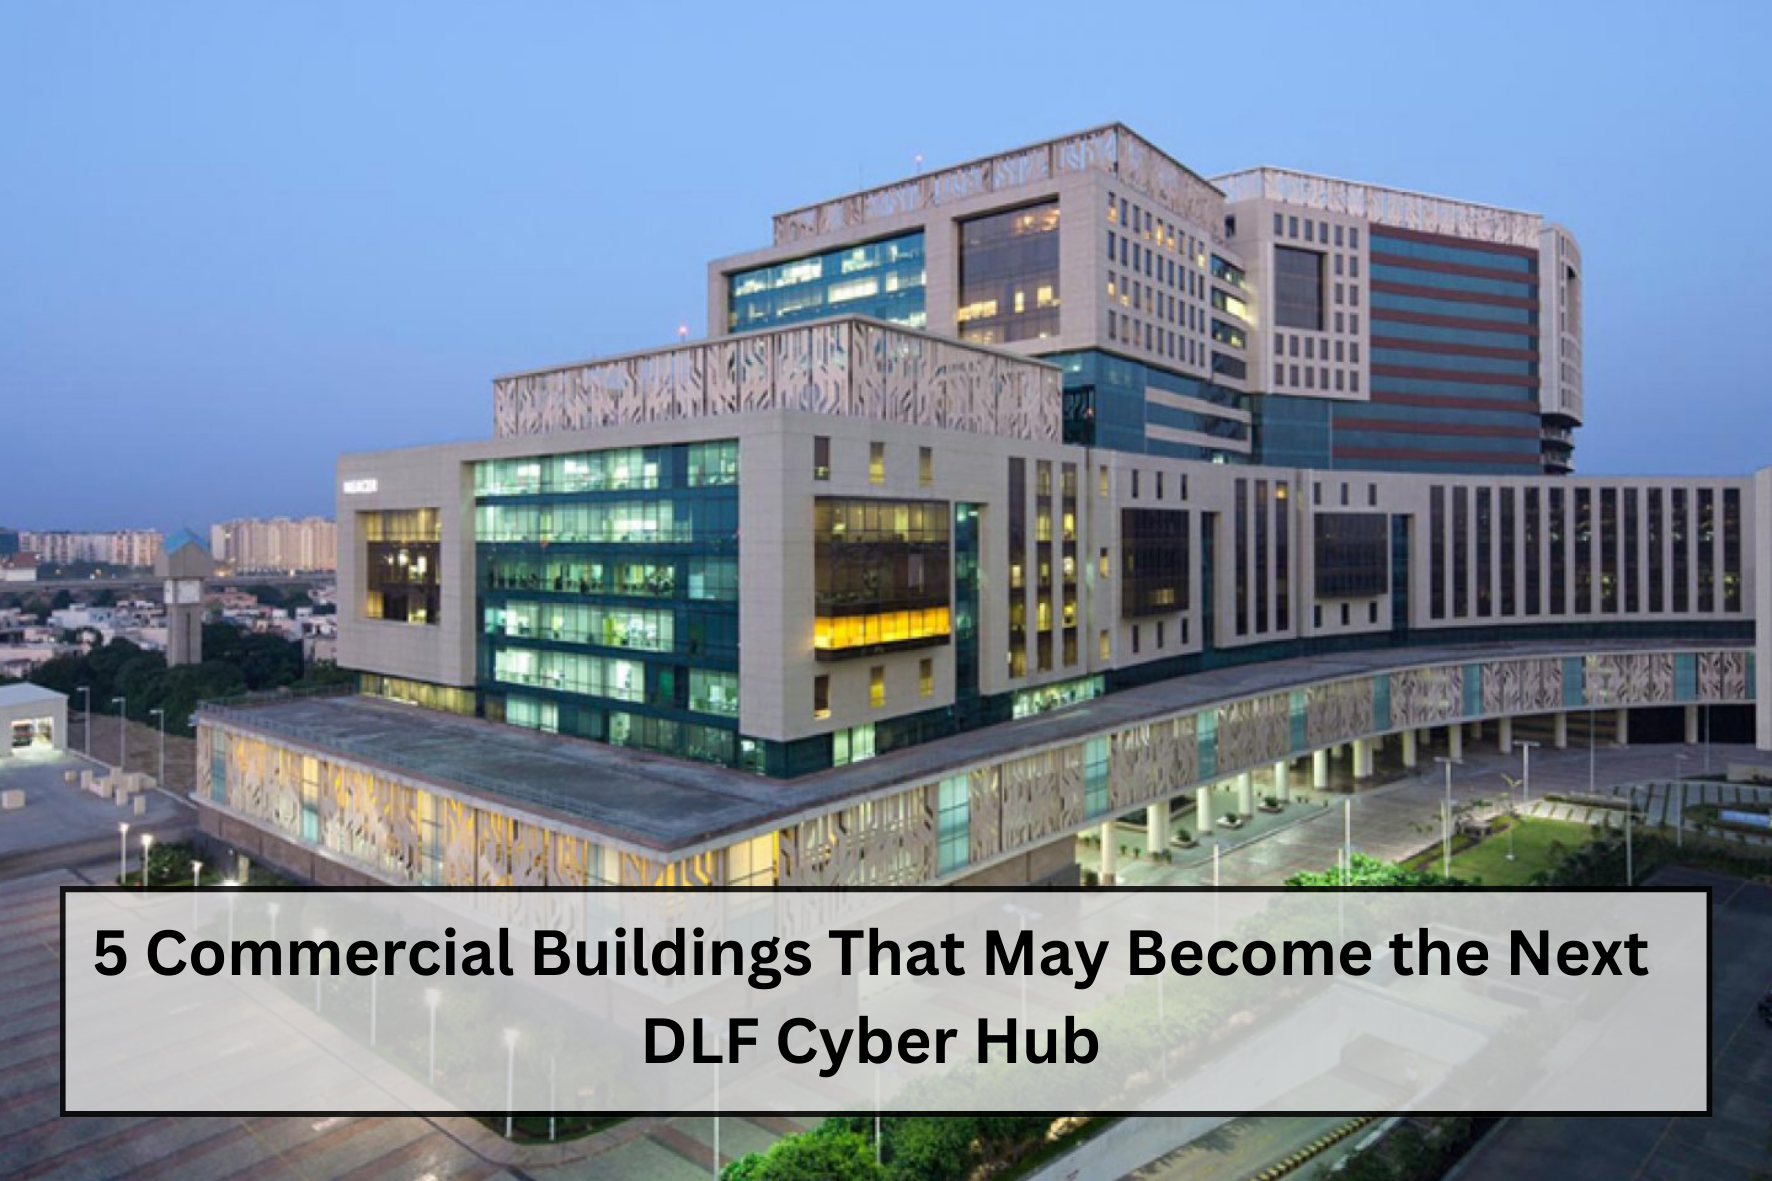 uploads/blog/5_Commercial_Buildings_That_May_Become_the_Next_DLF_Cyber_Hub.png